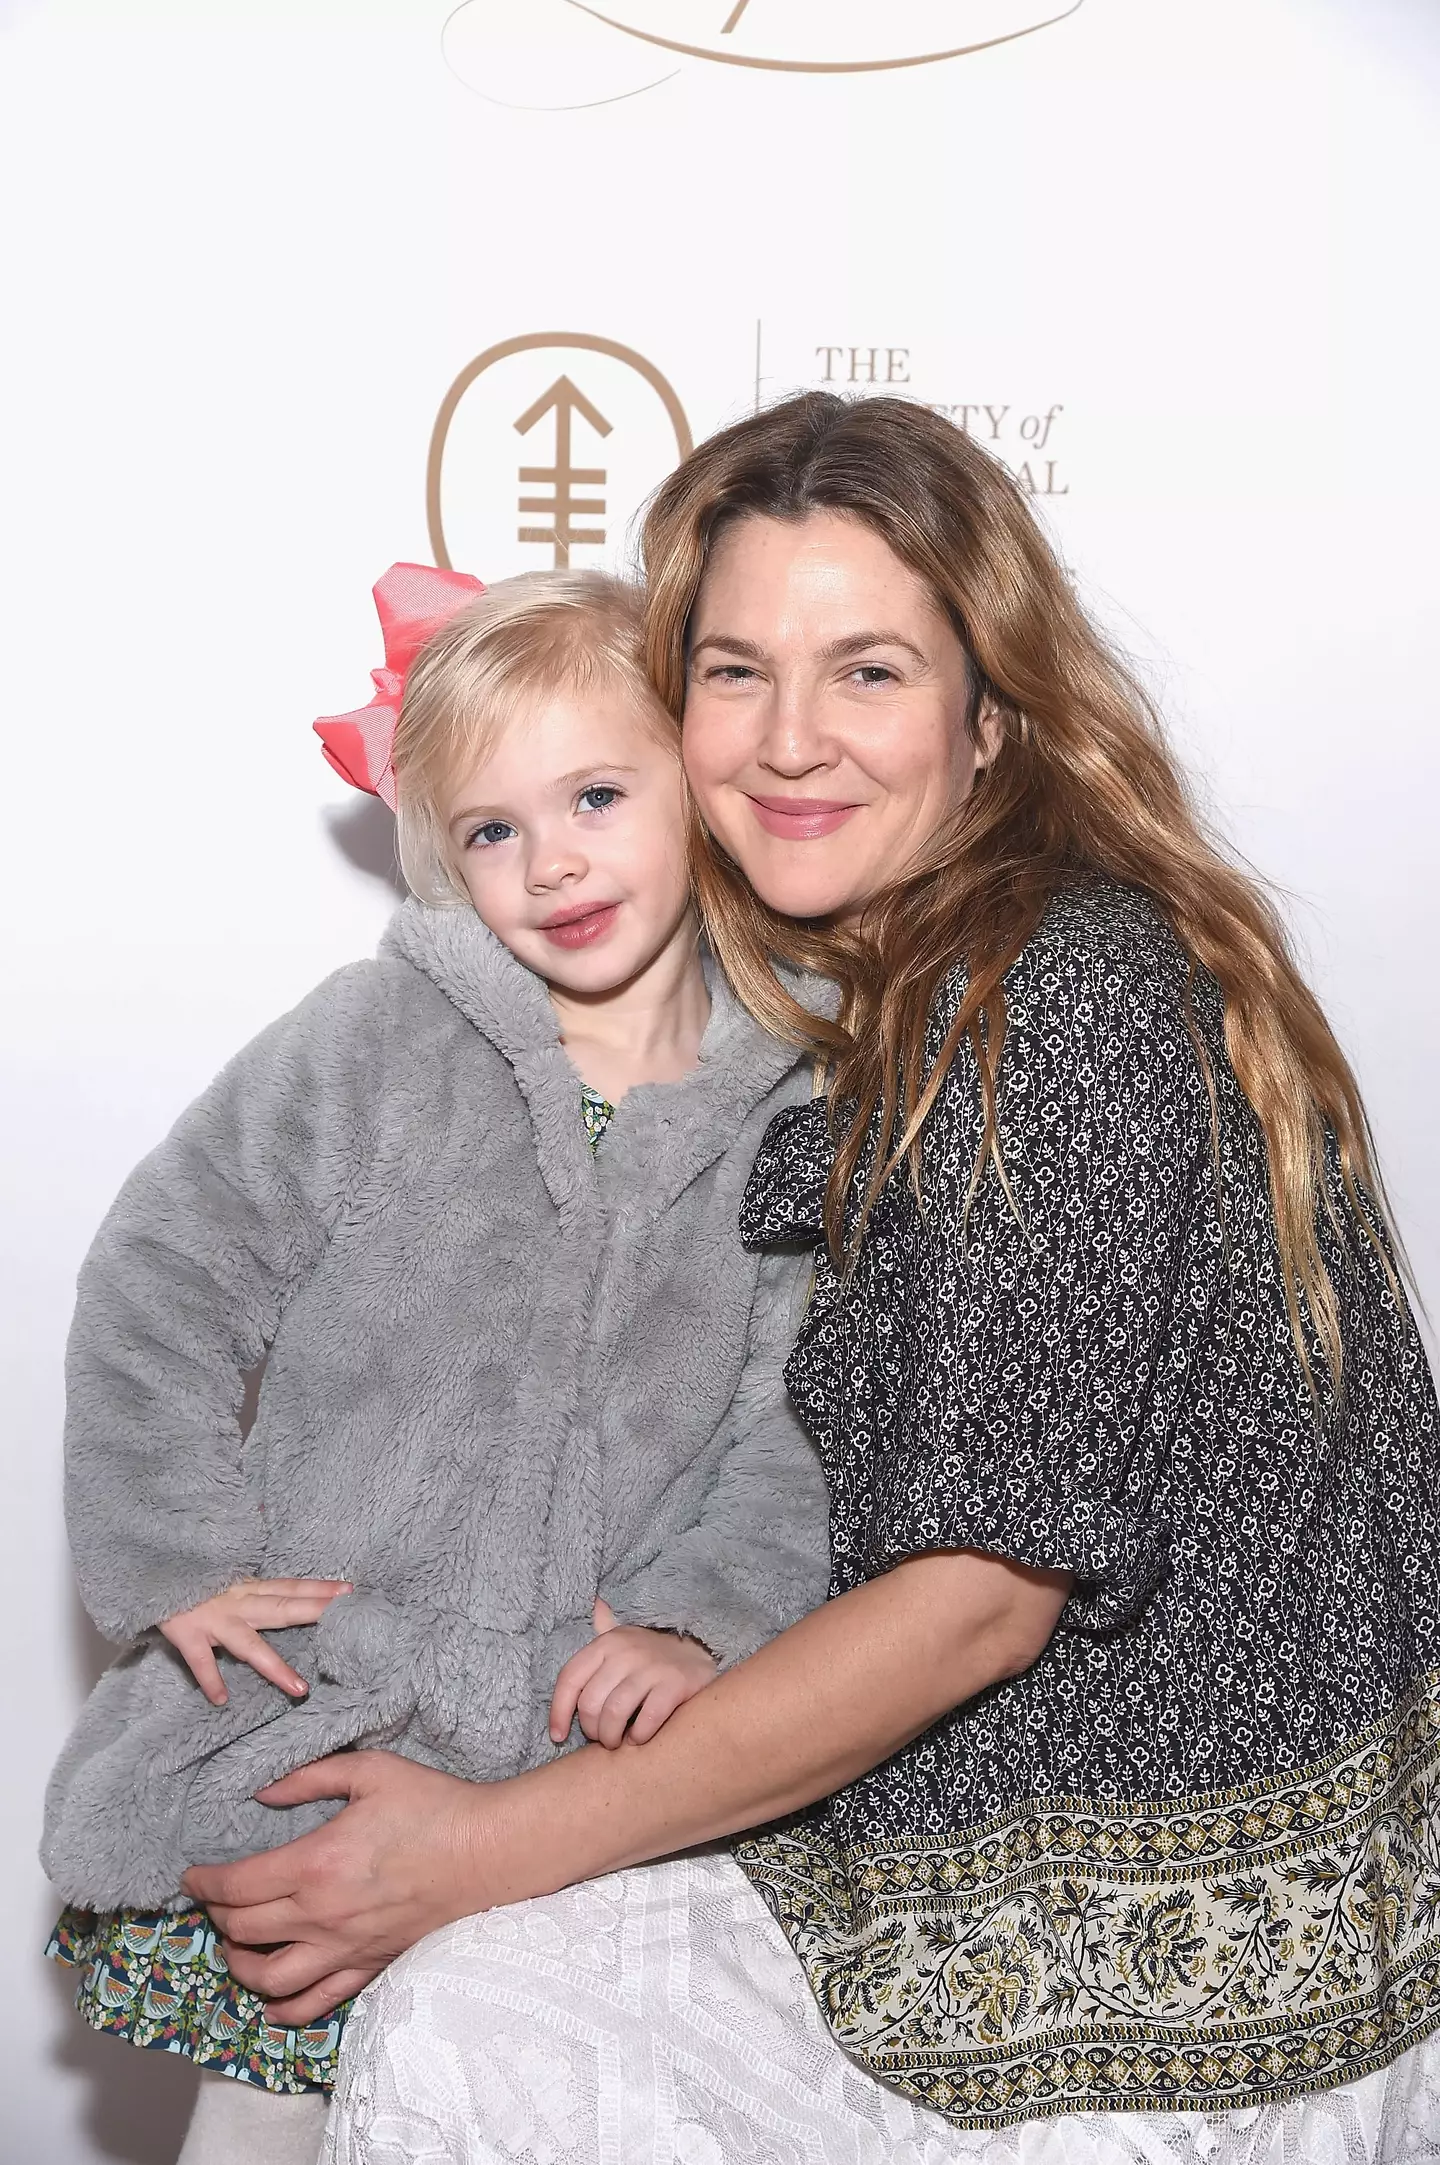 Barrymore with daughter Frankie in 2017.